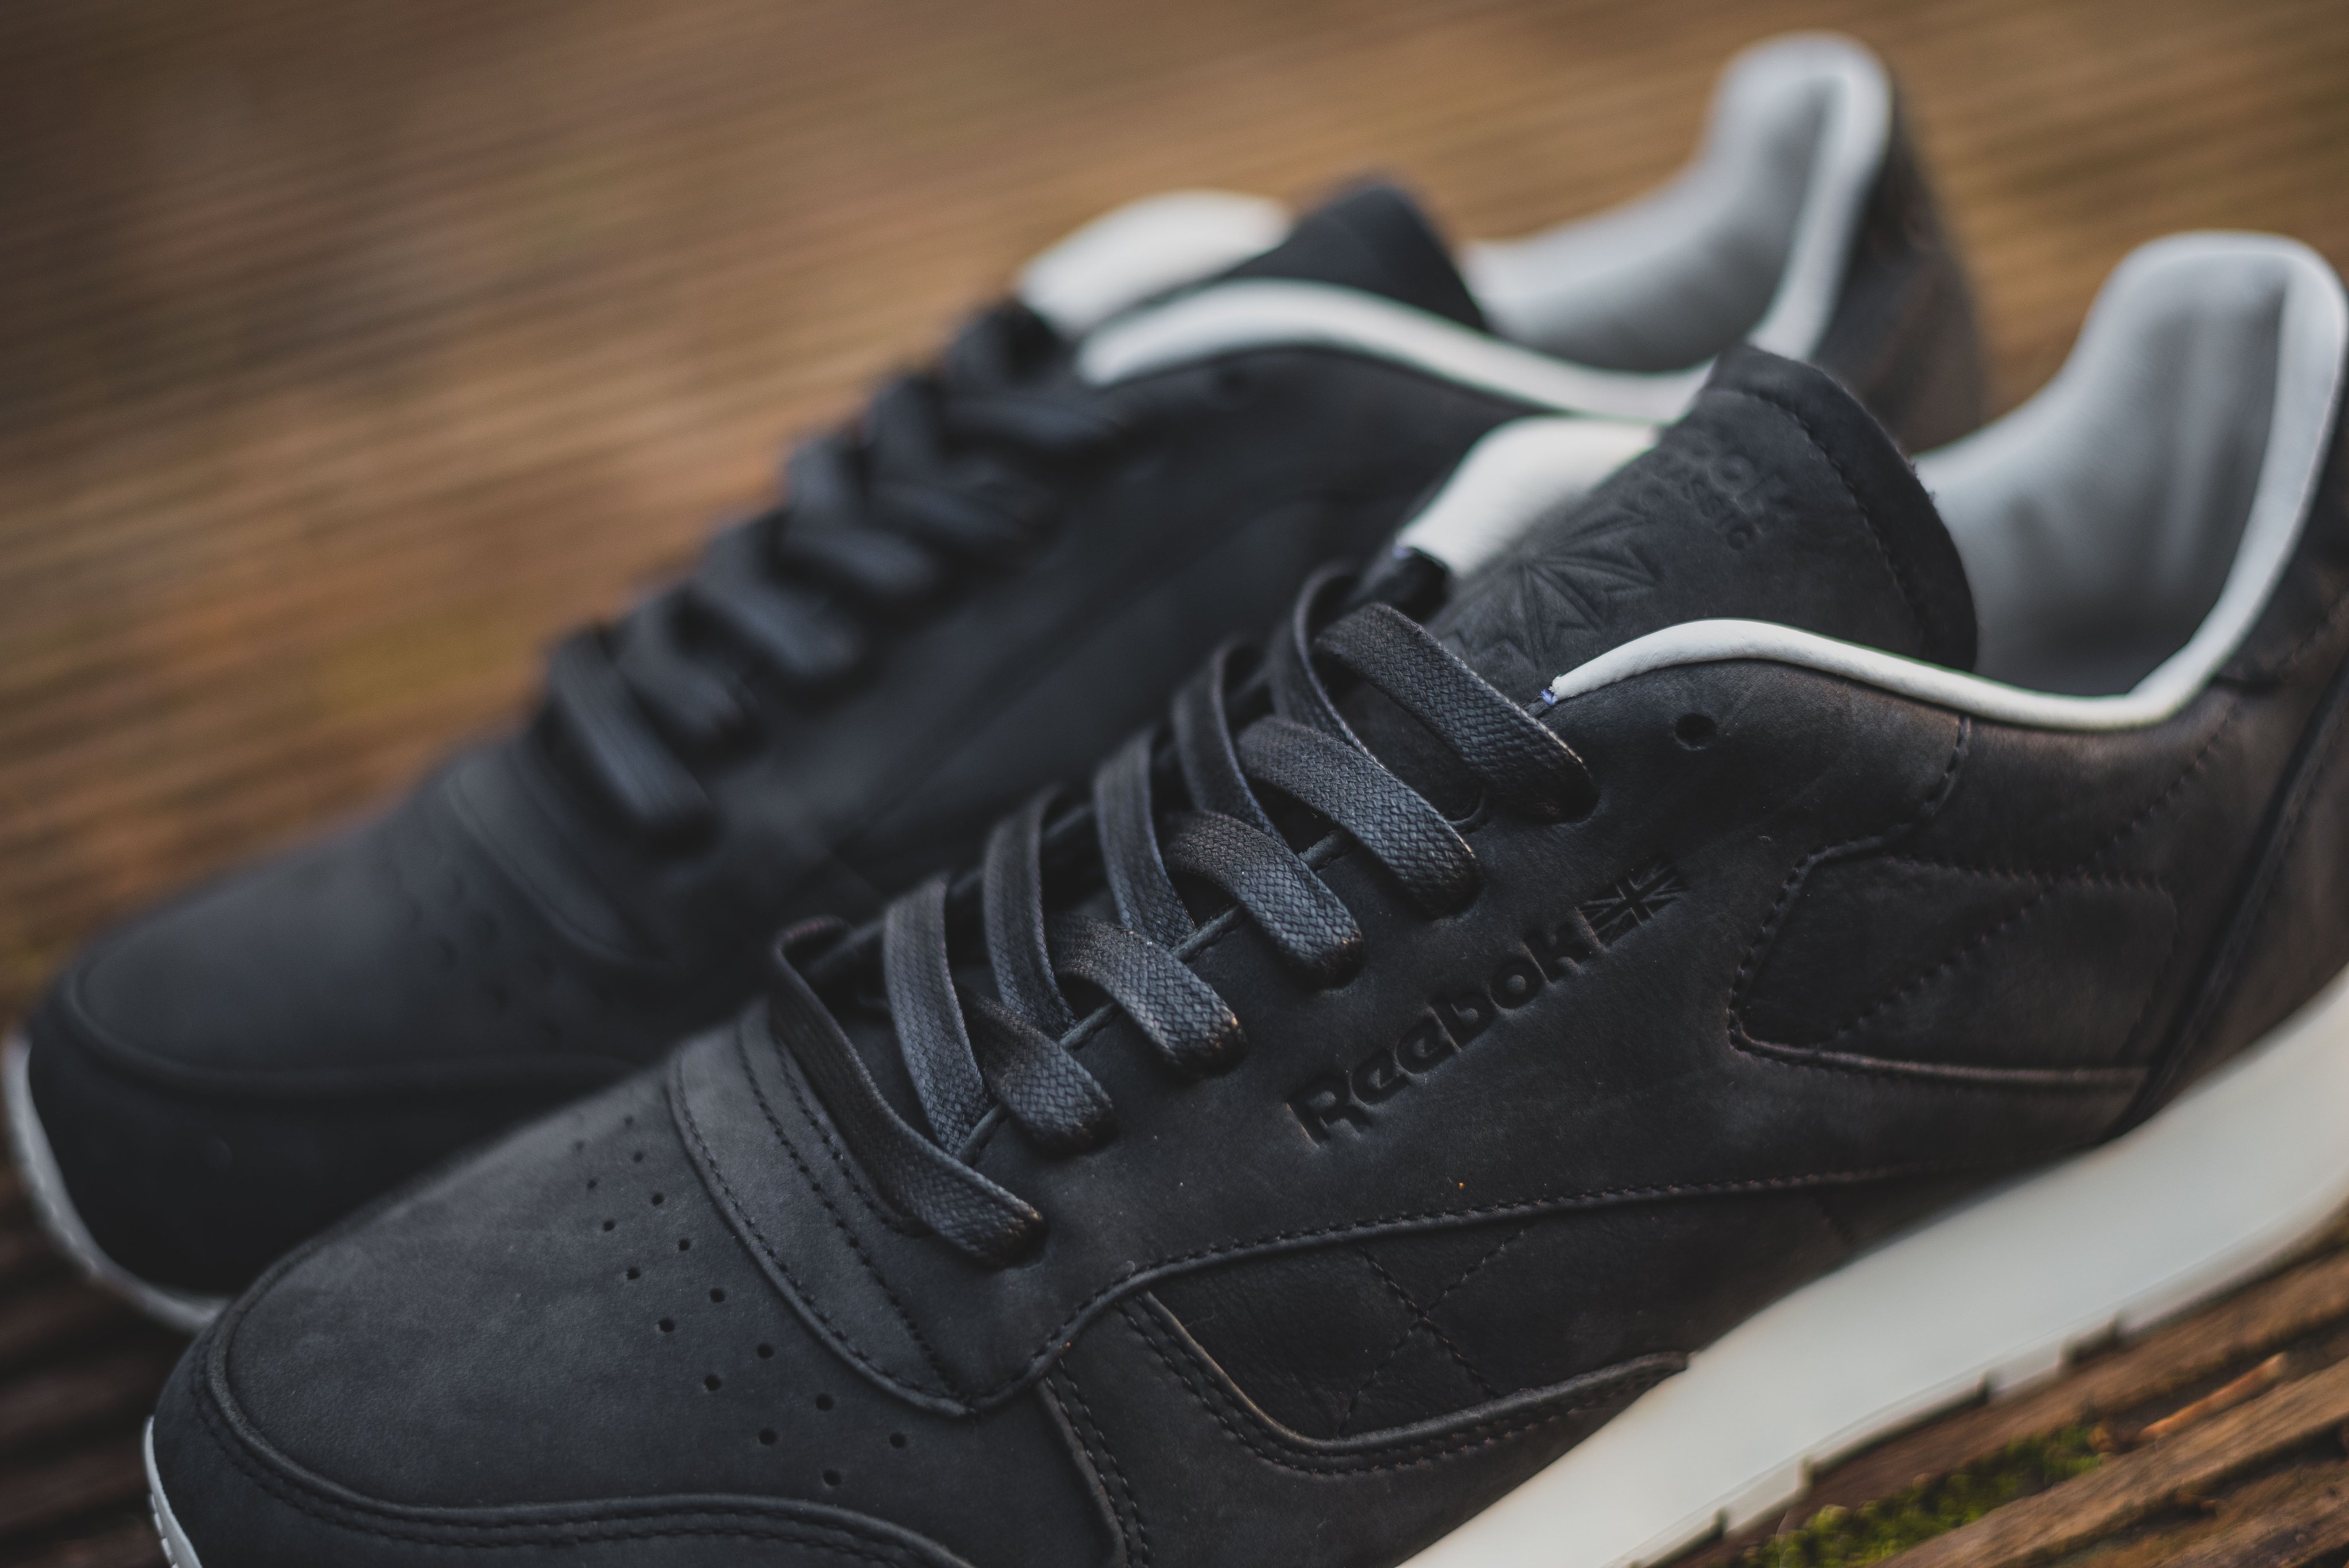 HANON on Twitter: Classic Leather Lux PW black is available to buy ONLINE now! #reebok #hanon https://t.co/pUpzhSVqVu https://t.co/pQ1lbiQoFK" Twitter